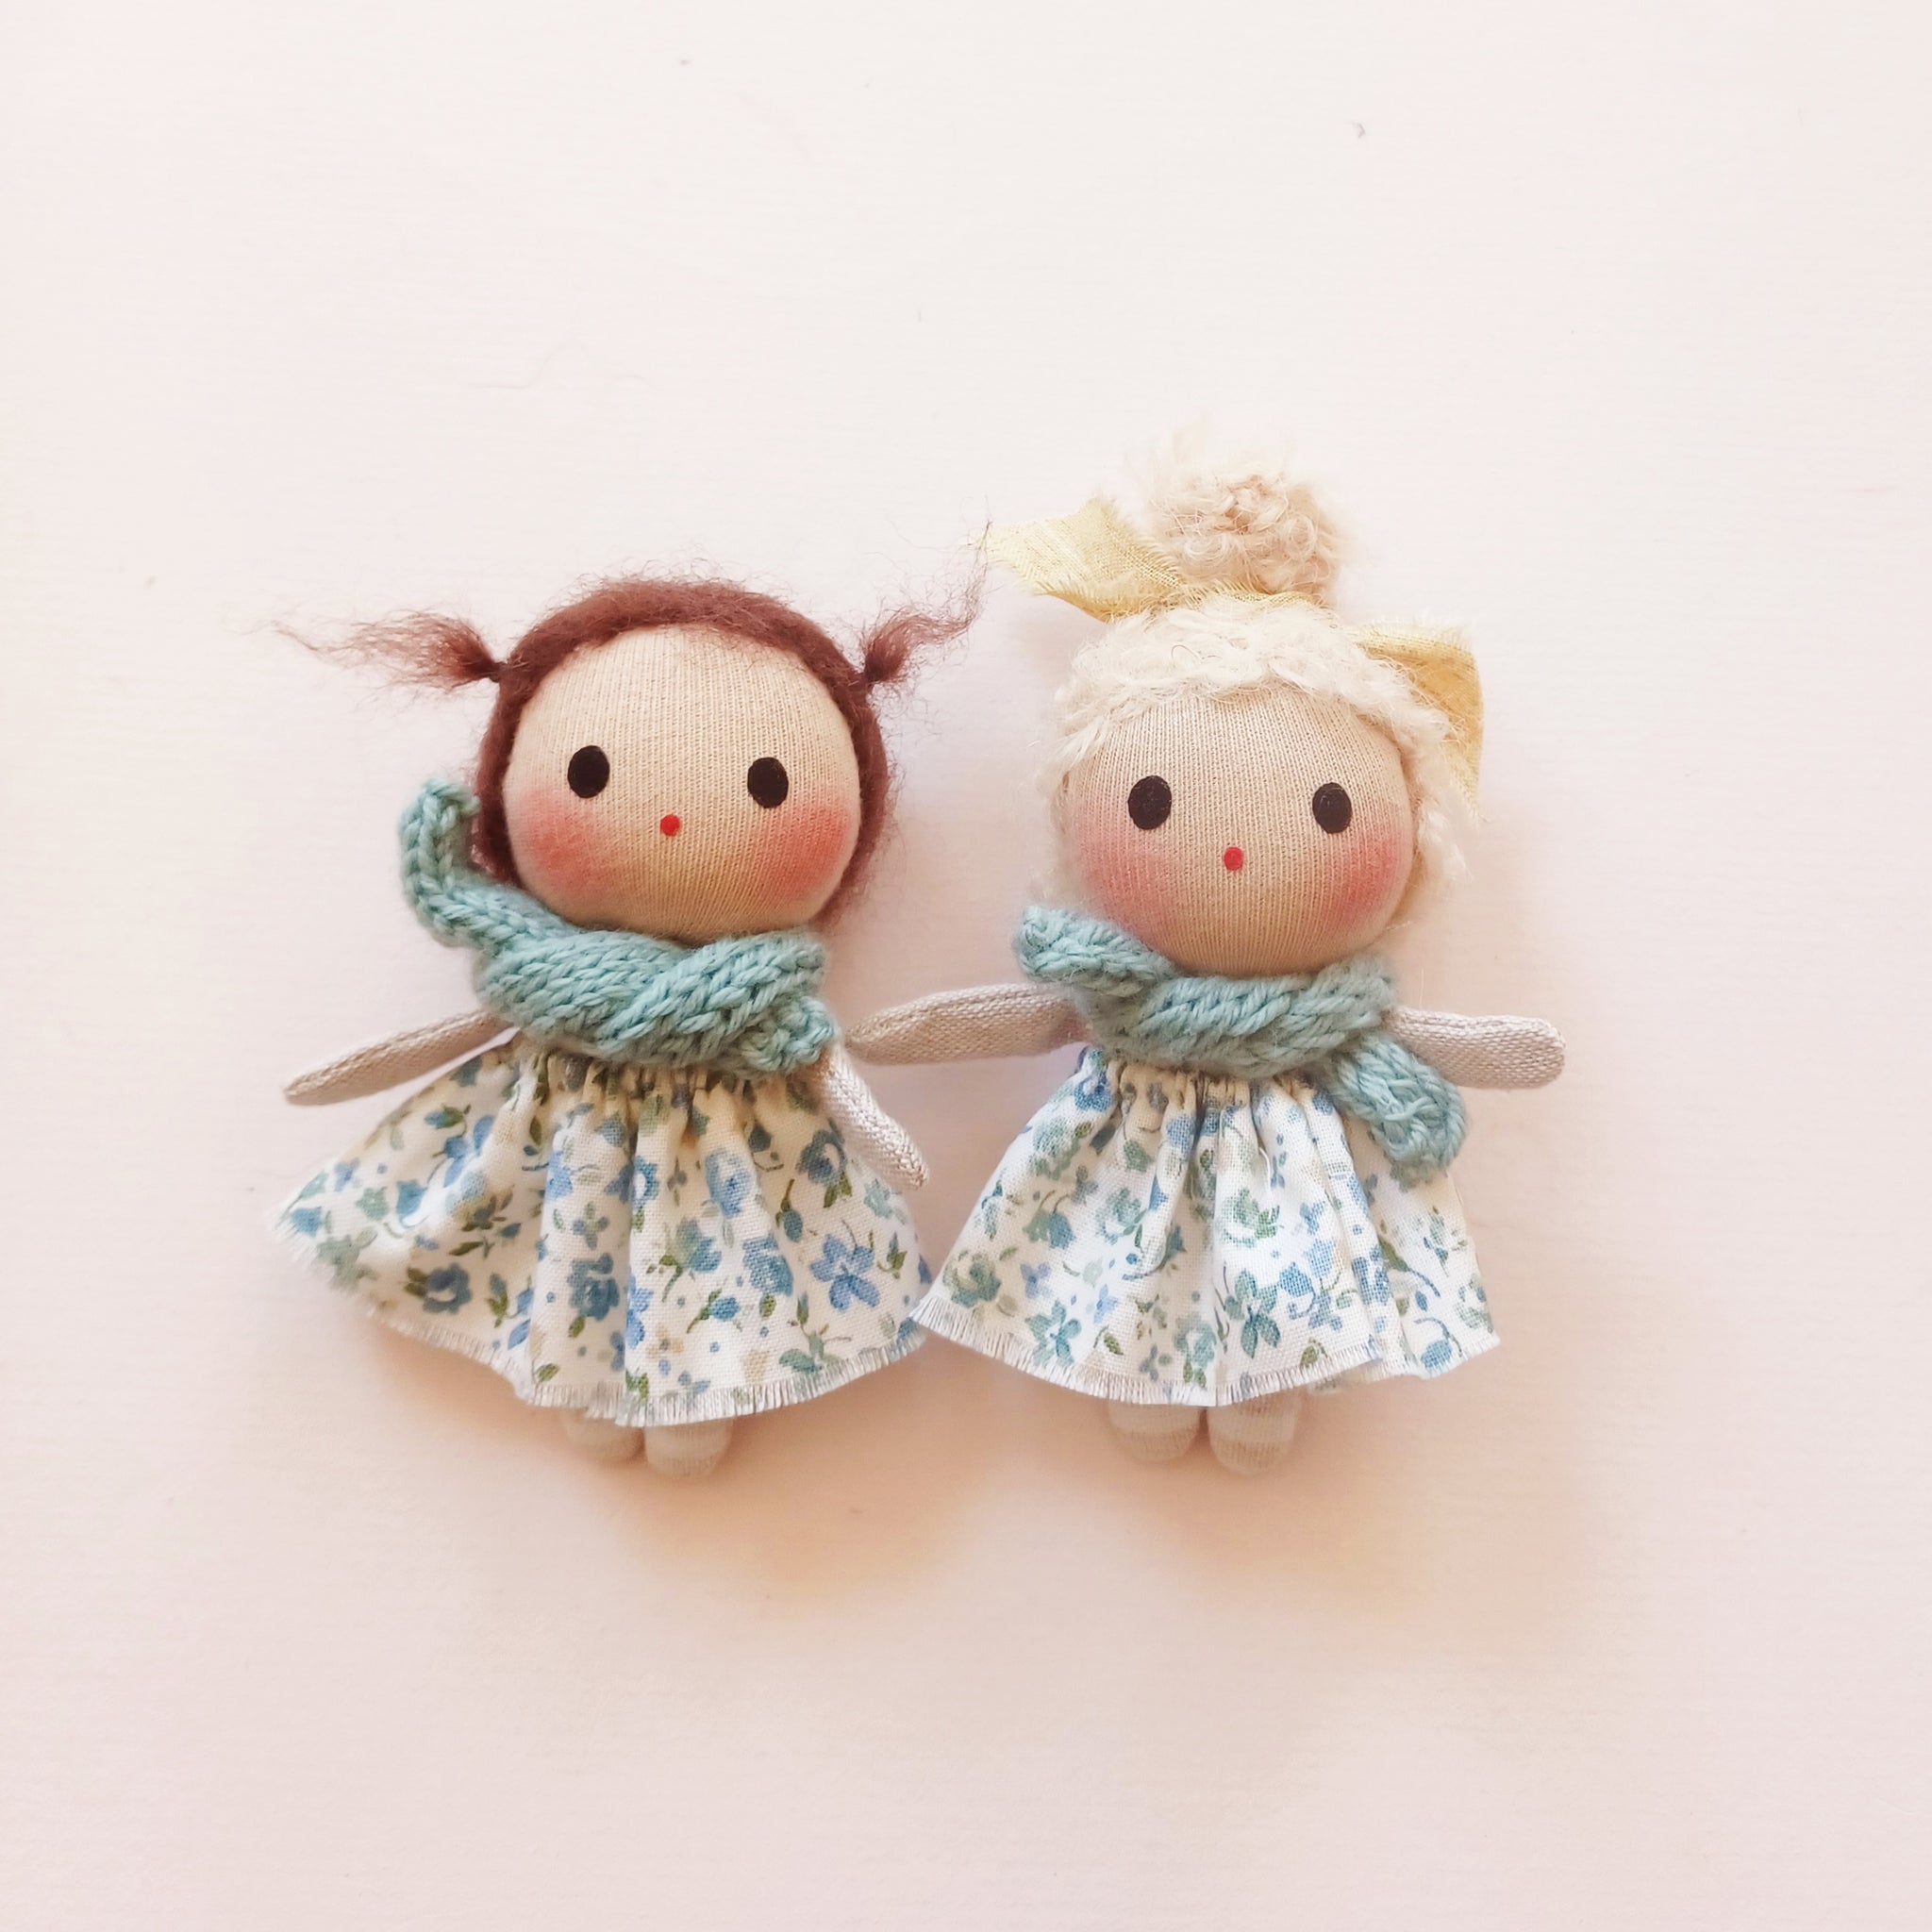 Teeny dolls in blue ditsy floral